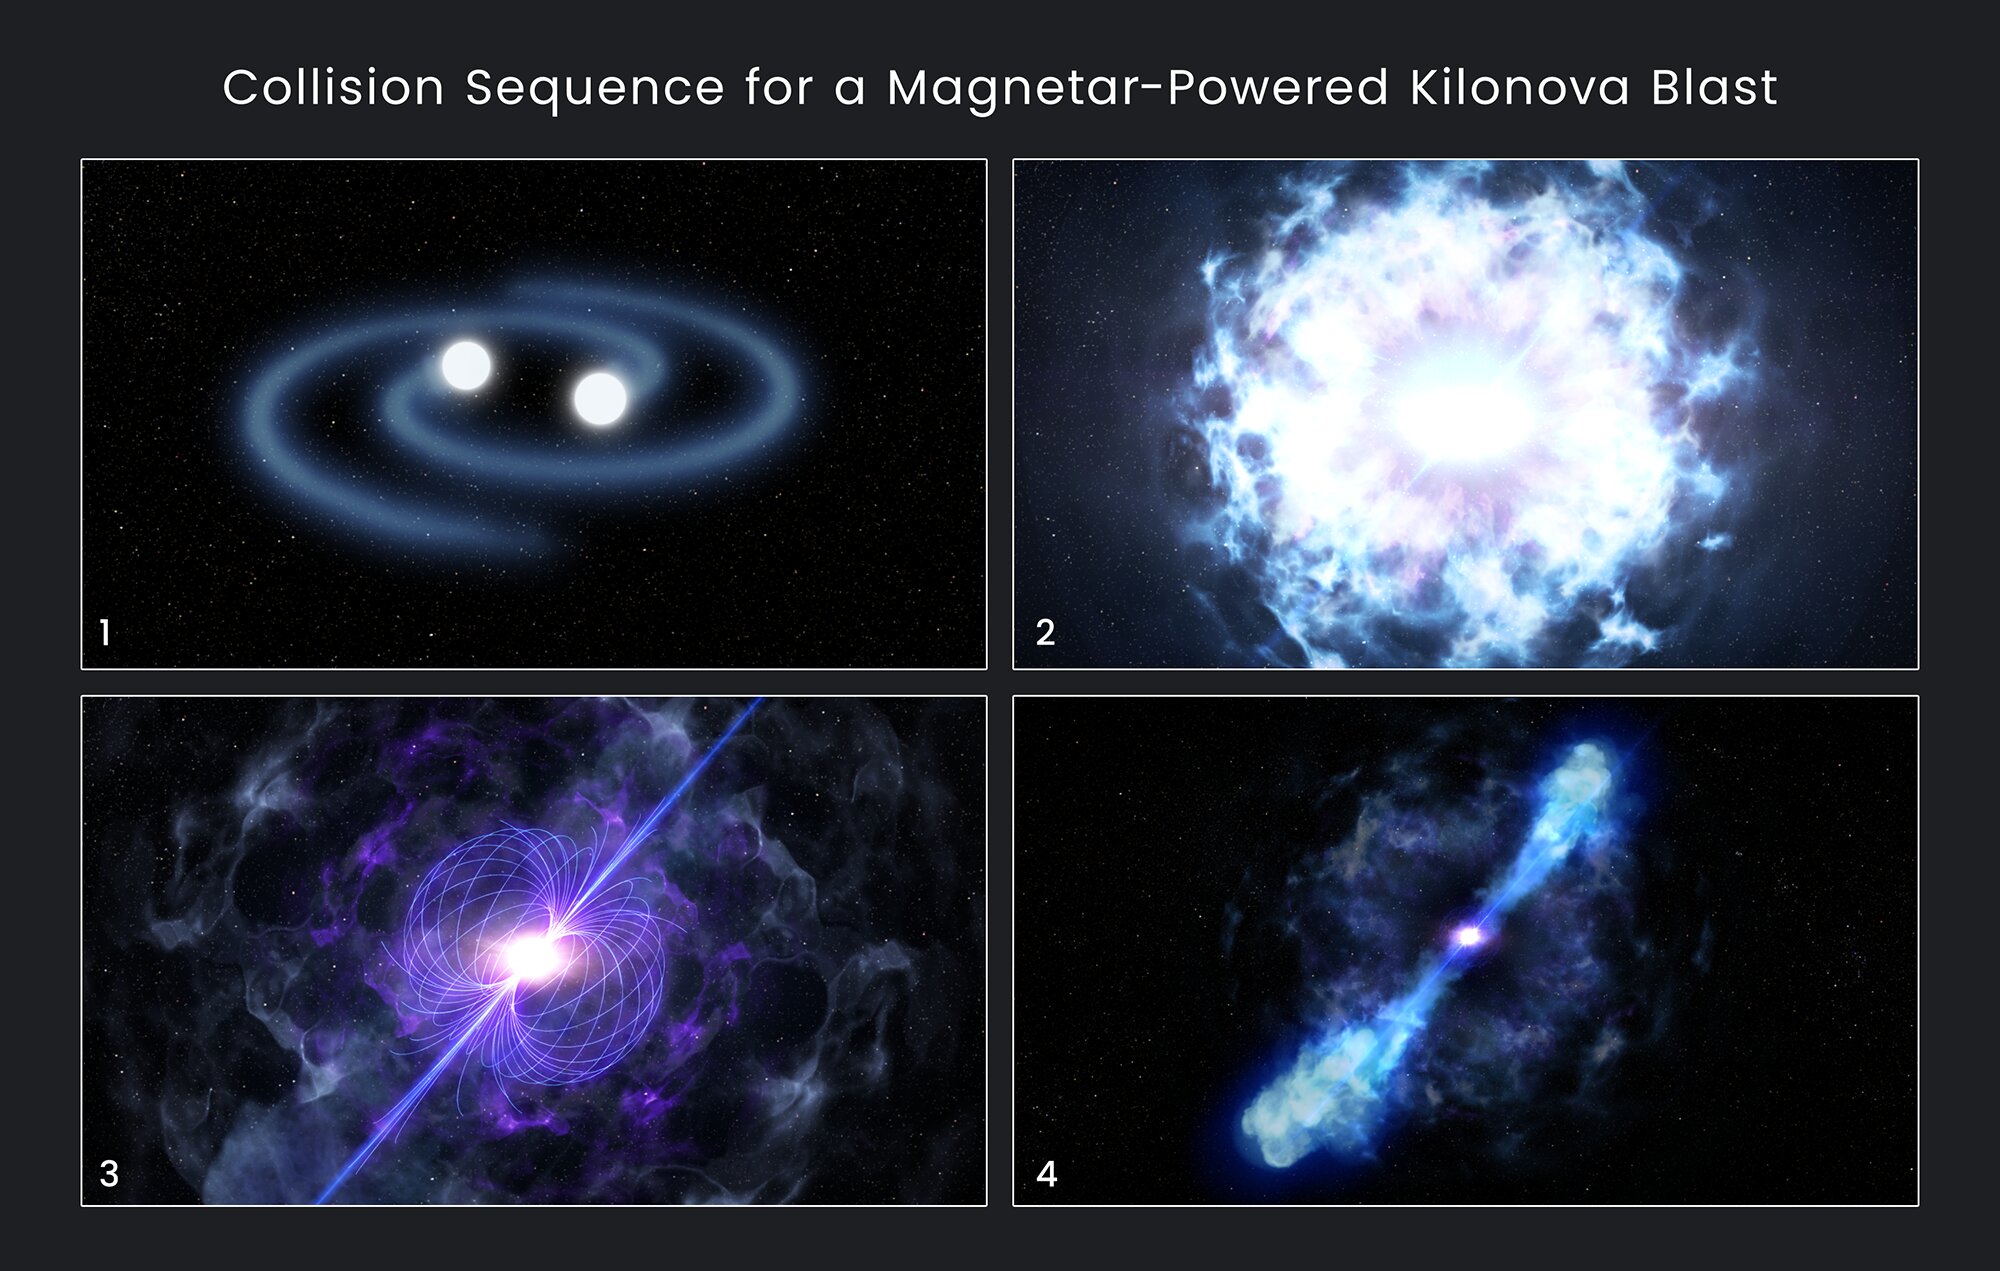 A magnetar is a type of neutron star believed to have an extremely